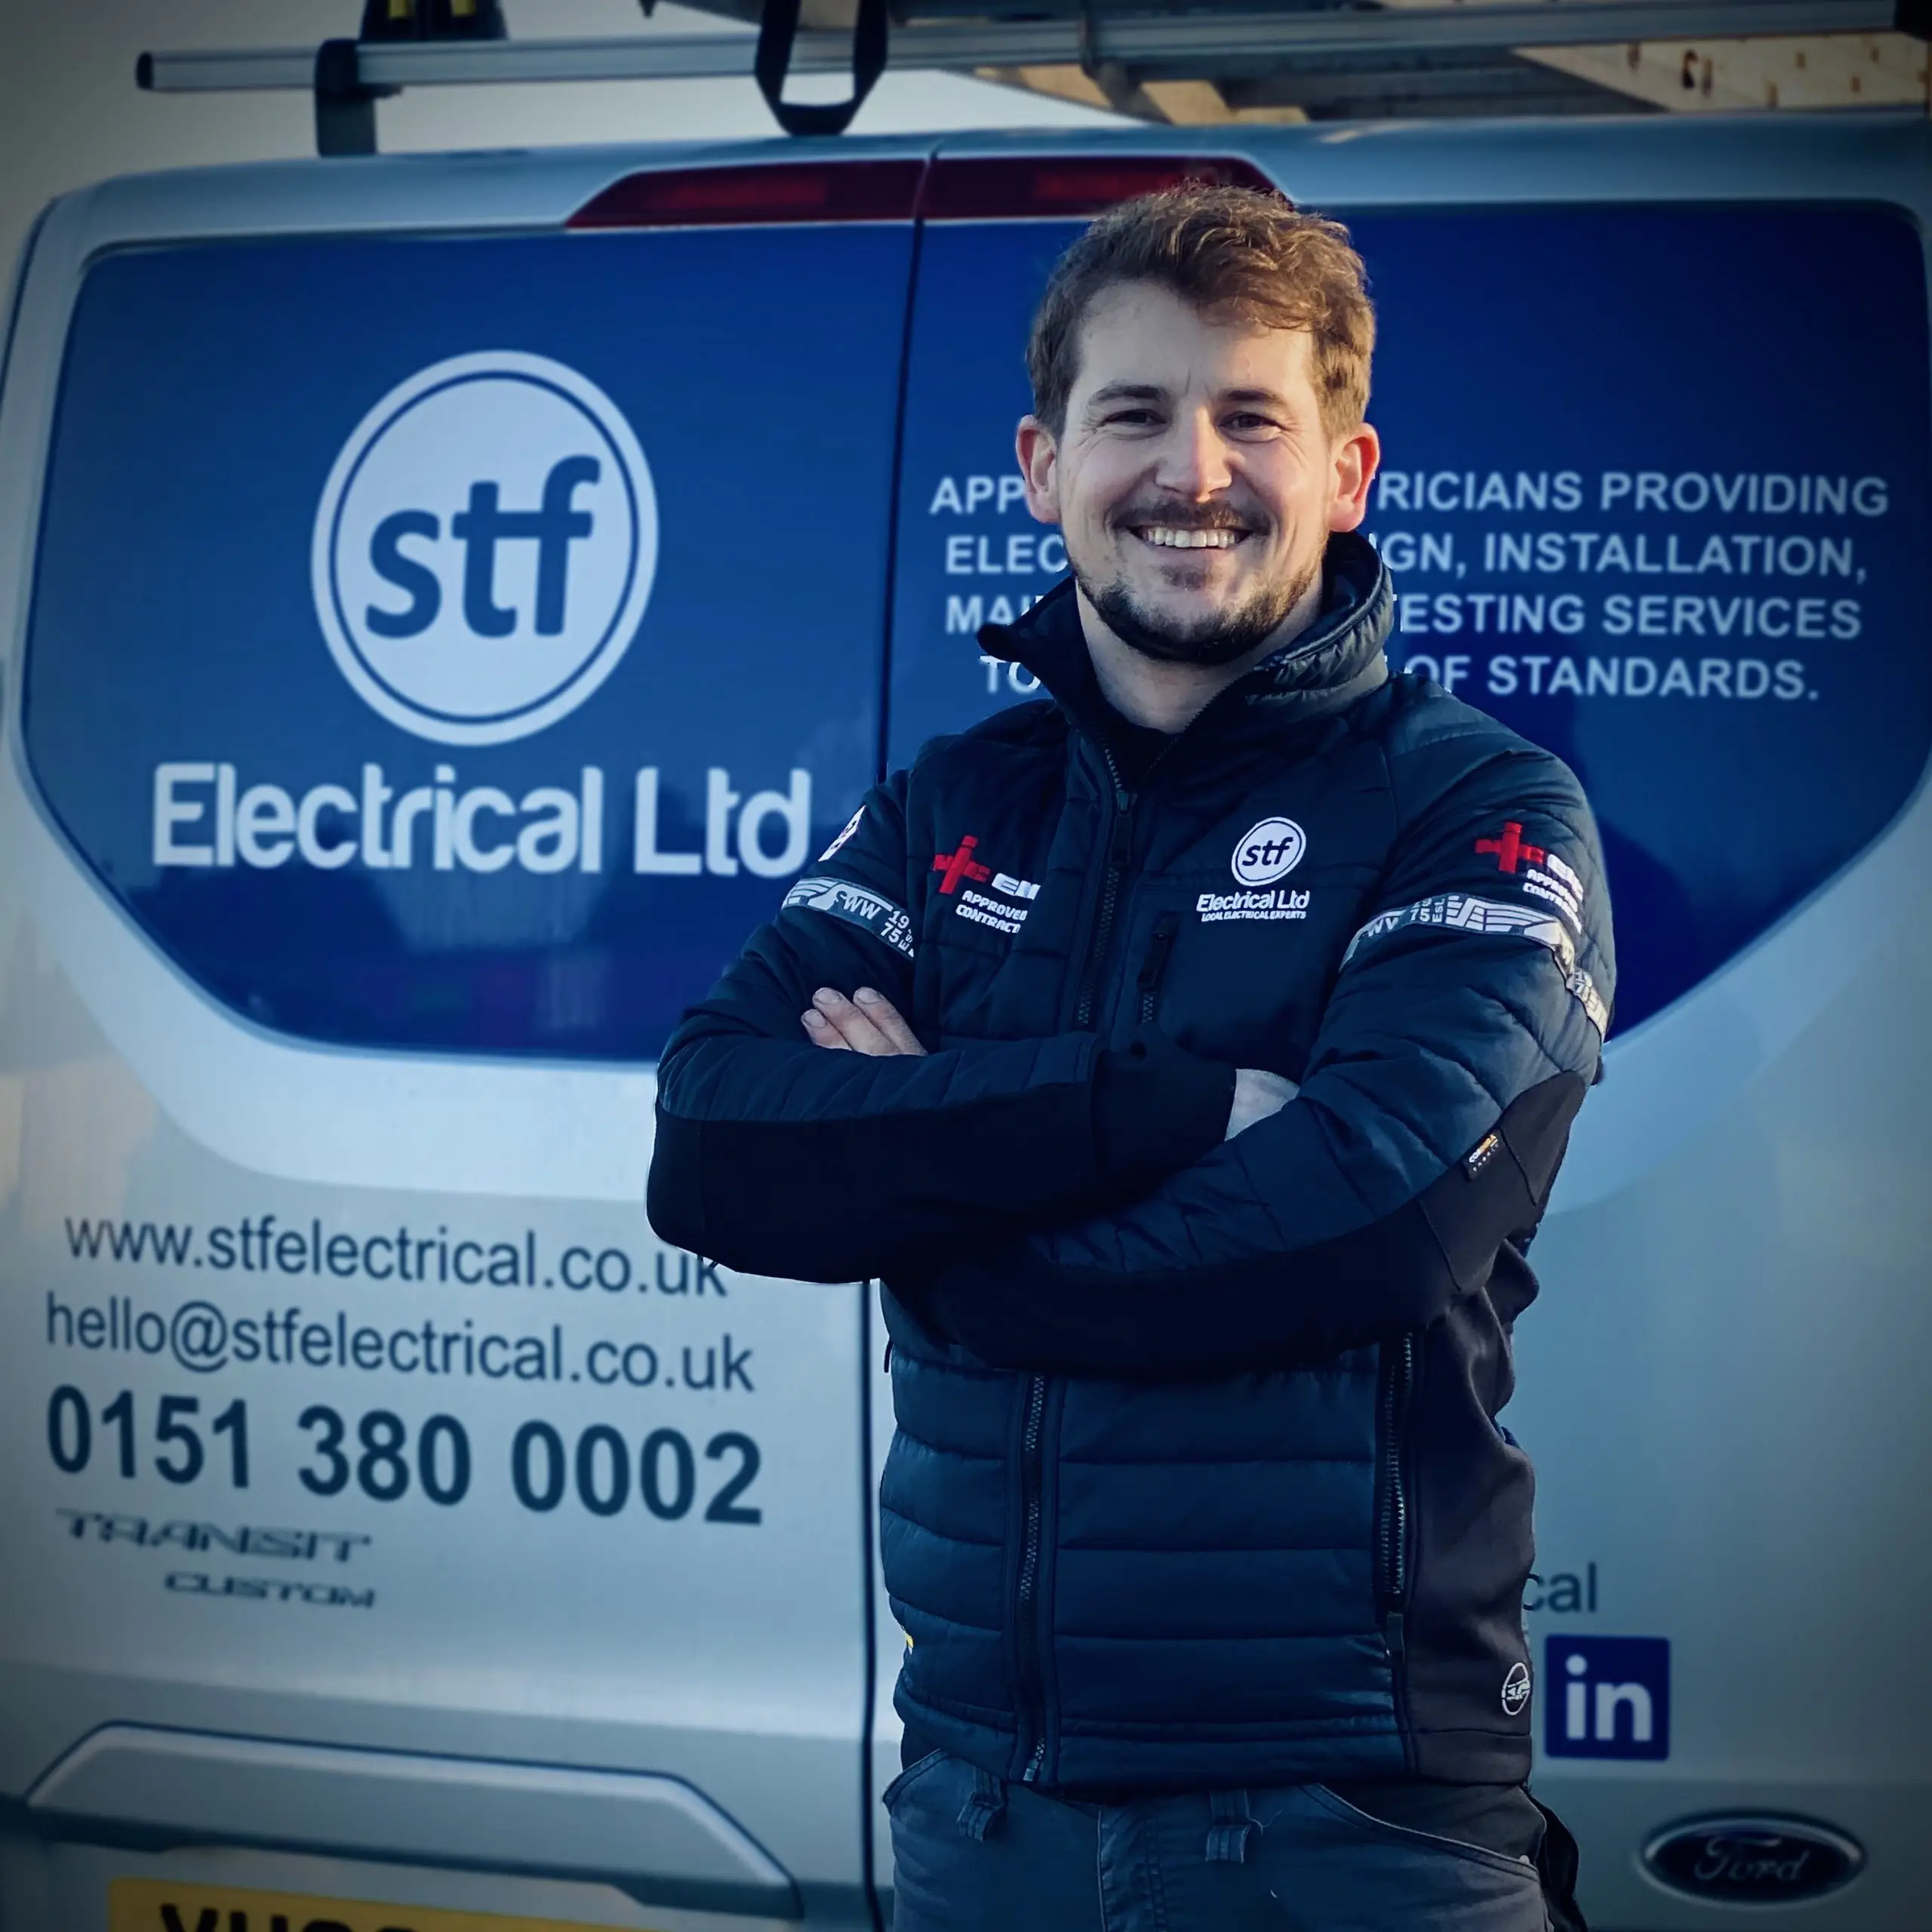 Image of Scott, Managing Director of STF Electrical Ltd, providing leadership and guidance.